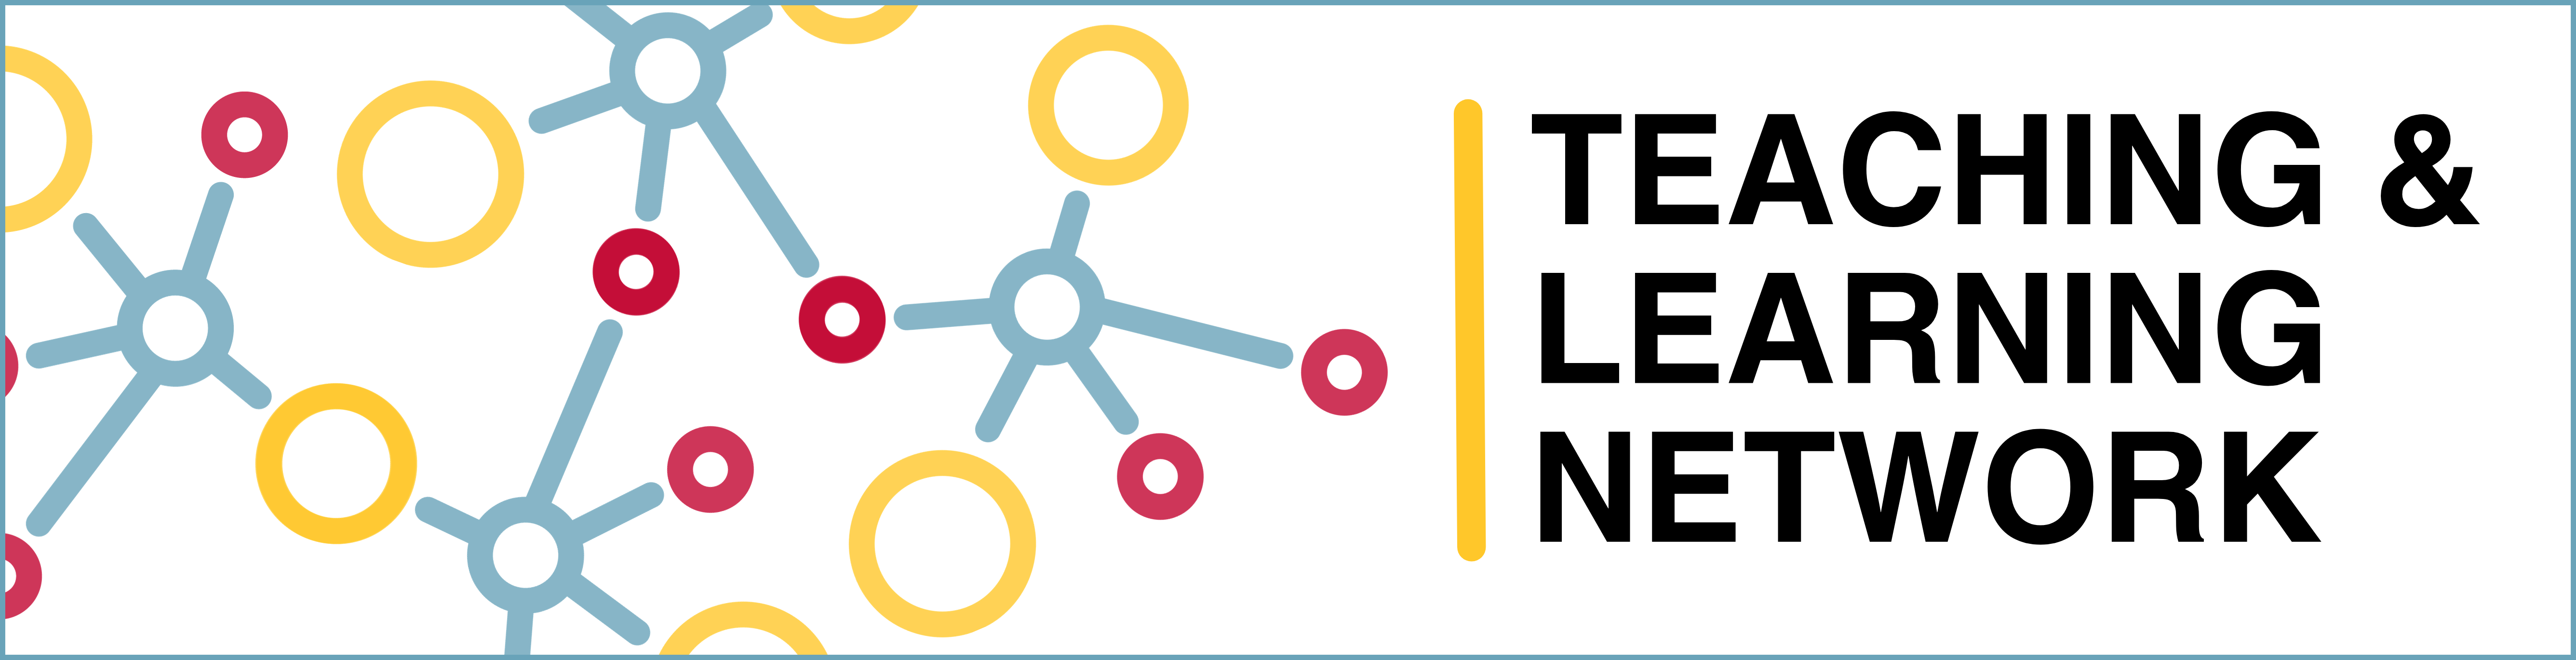 Teaching & Learning Network